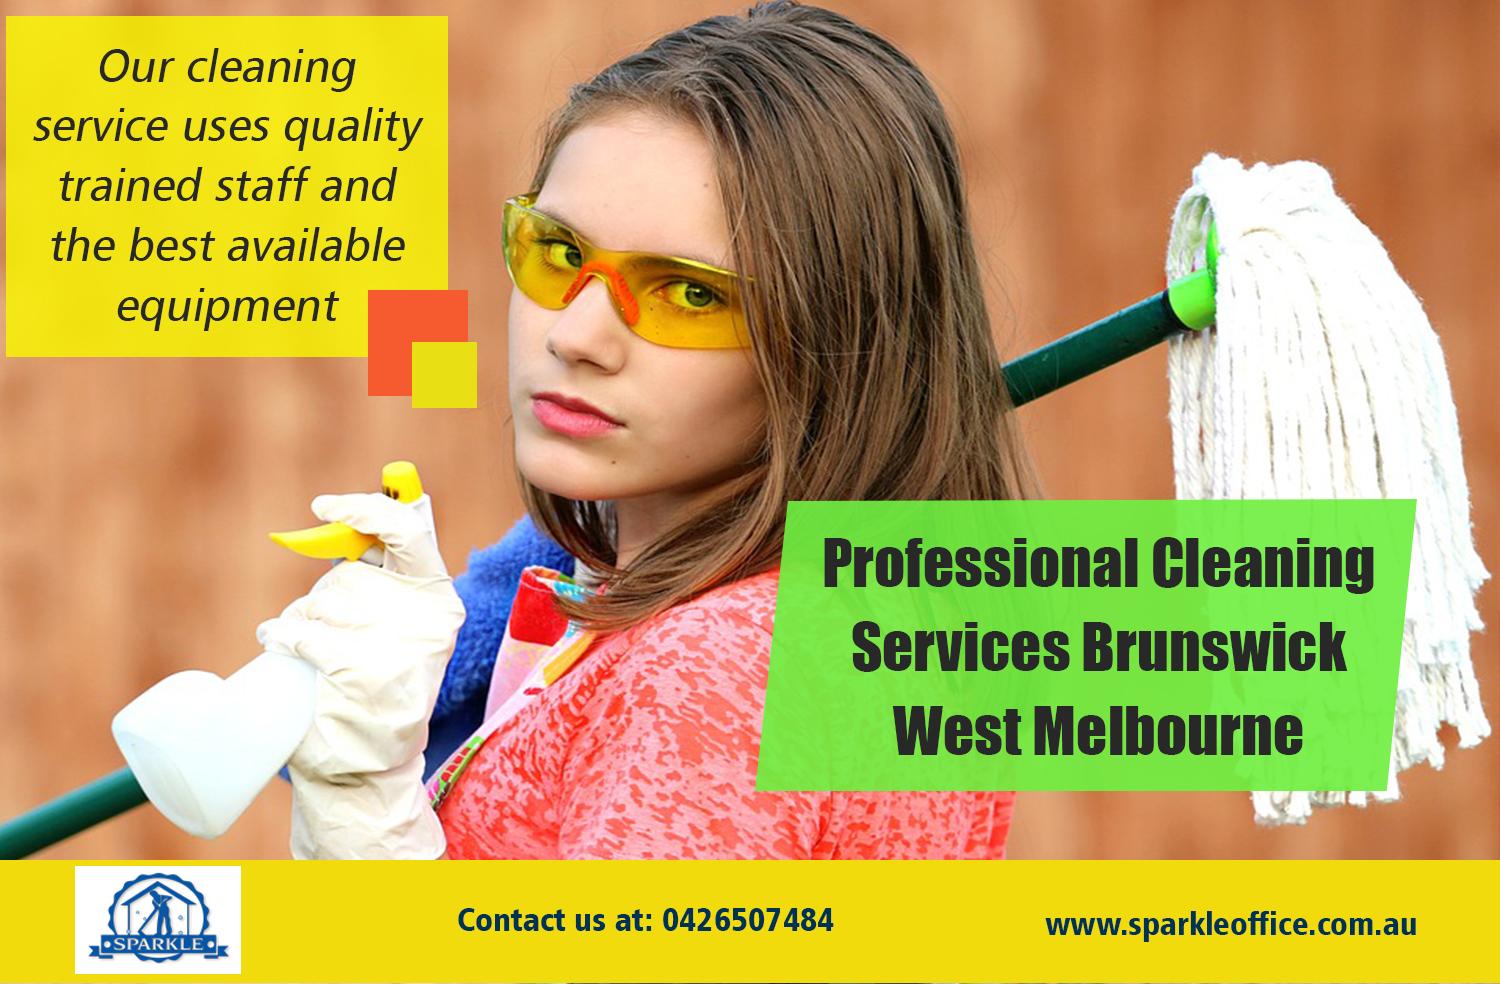 Professional Cleaning Services brunswick west Melbourne